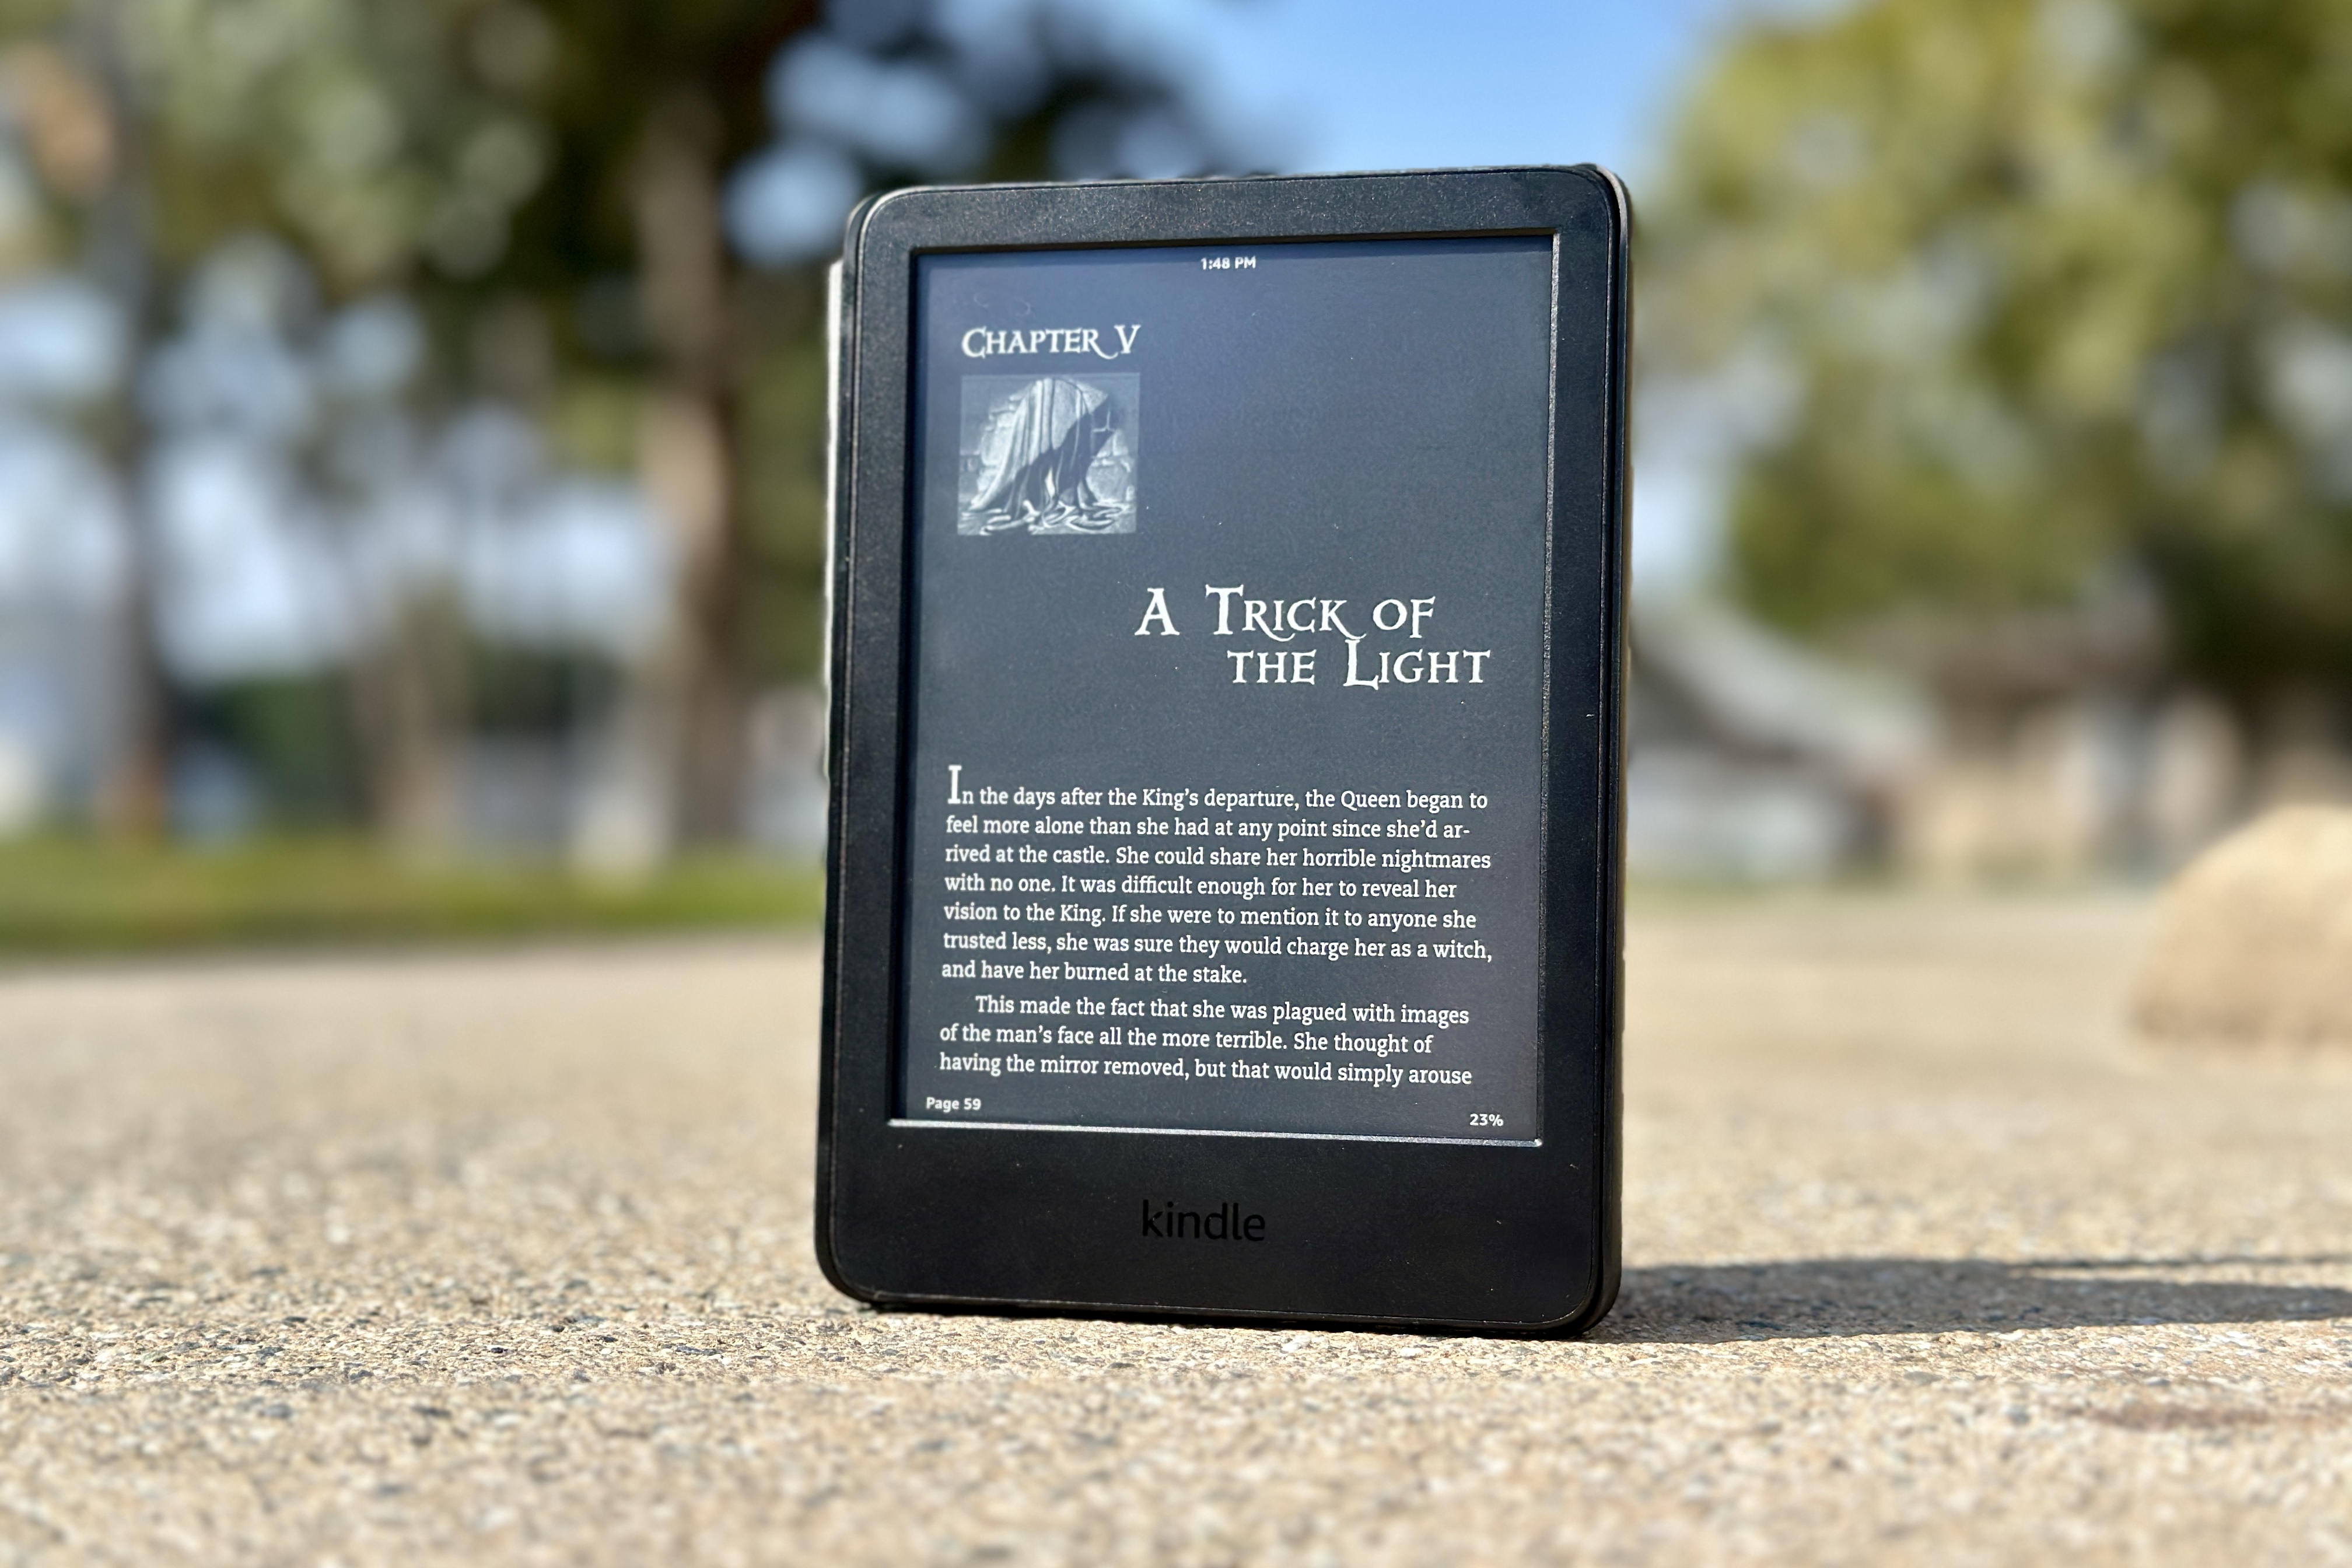 How to Convert a Kindle Book to a PDF